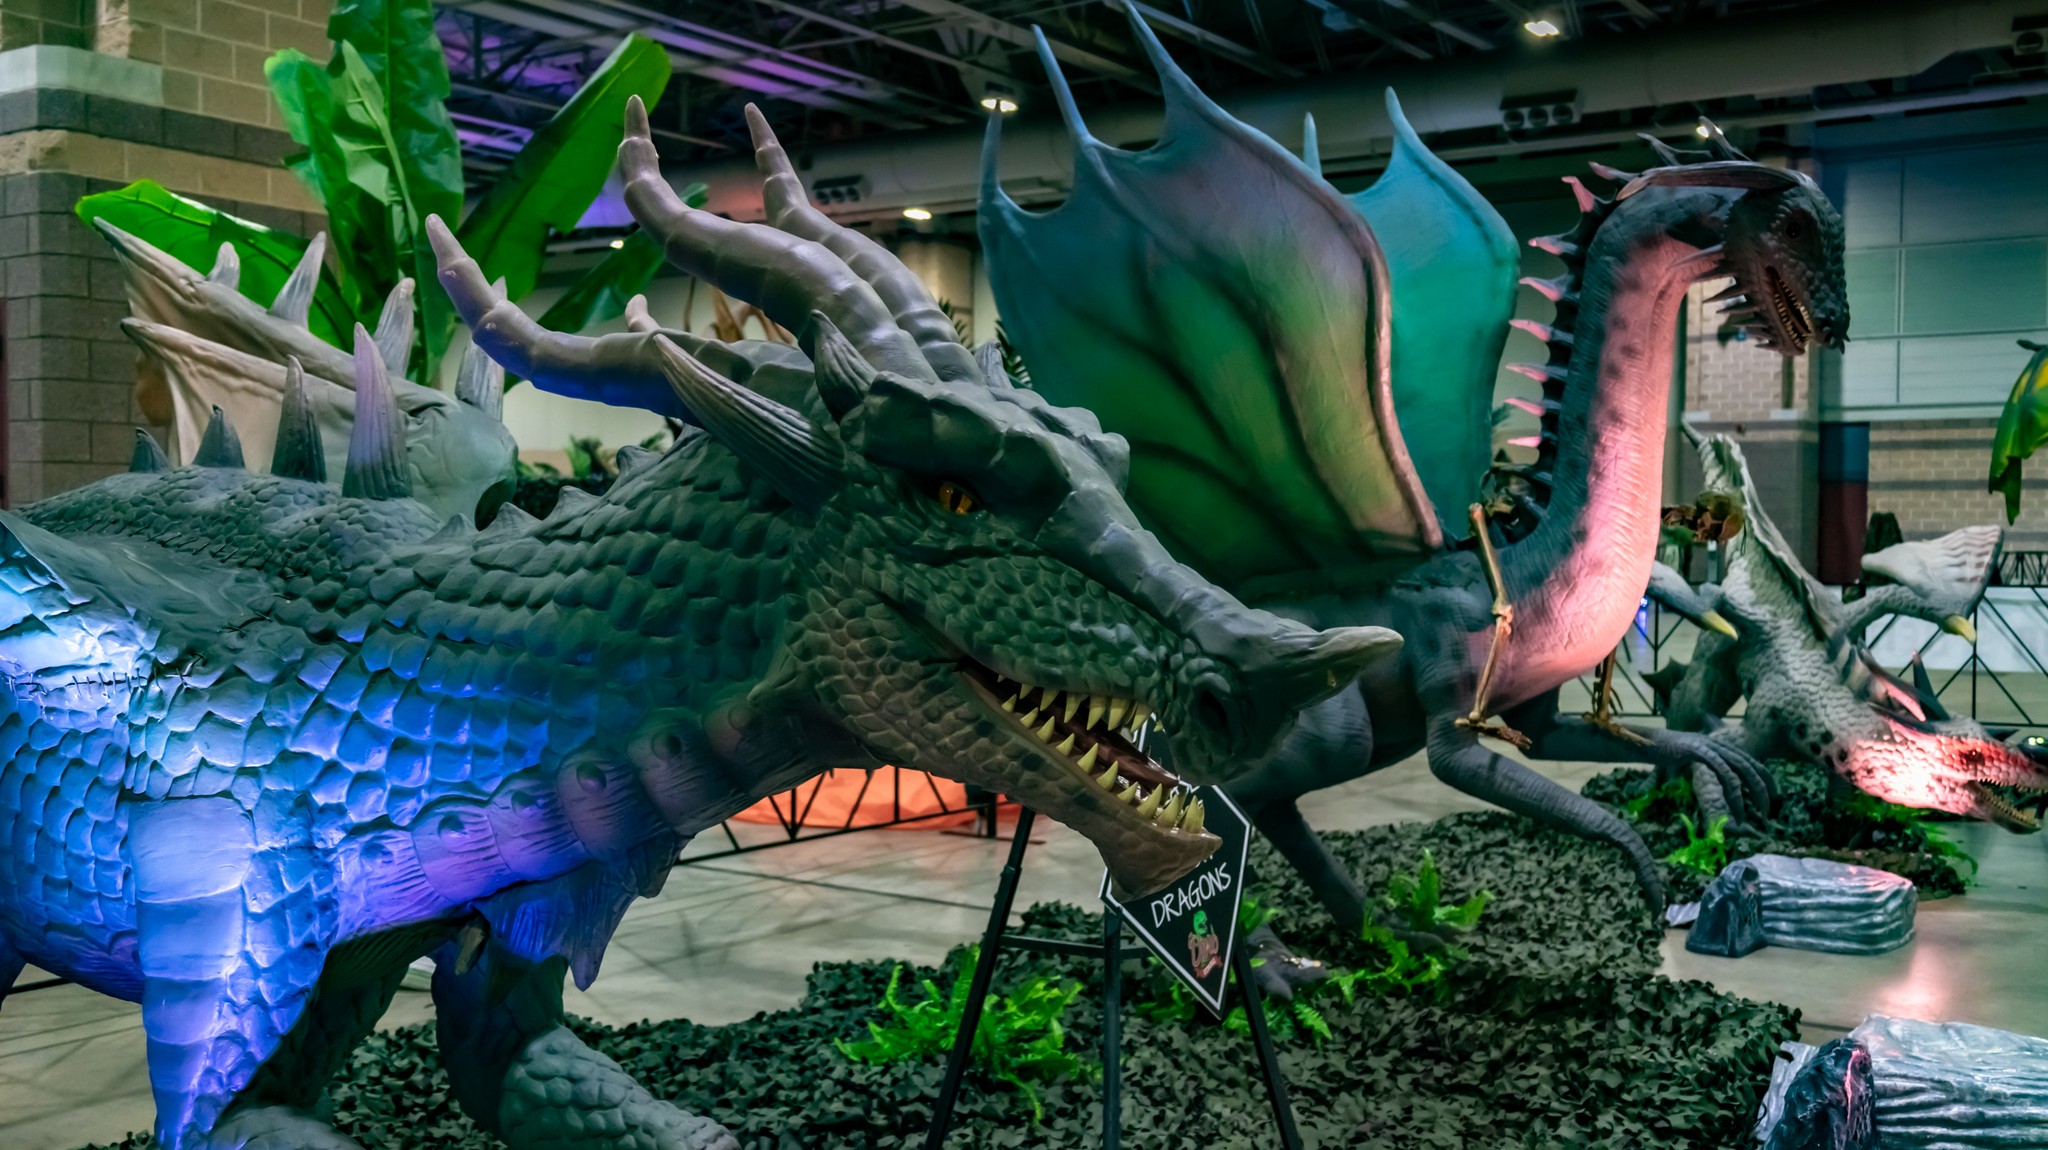 PHOTOS: Dino and Dragon Stroll roars its way to the Coliseum